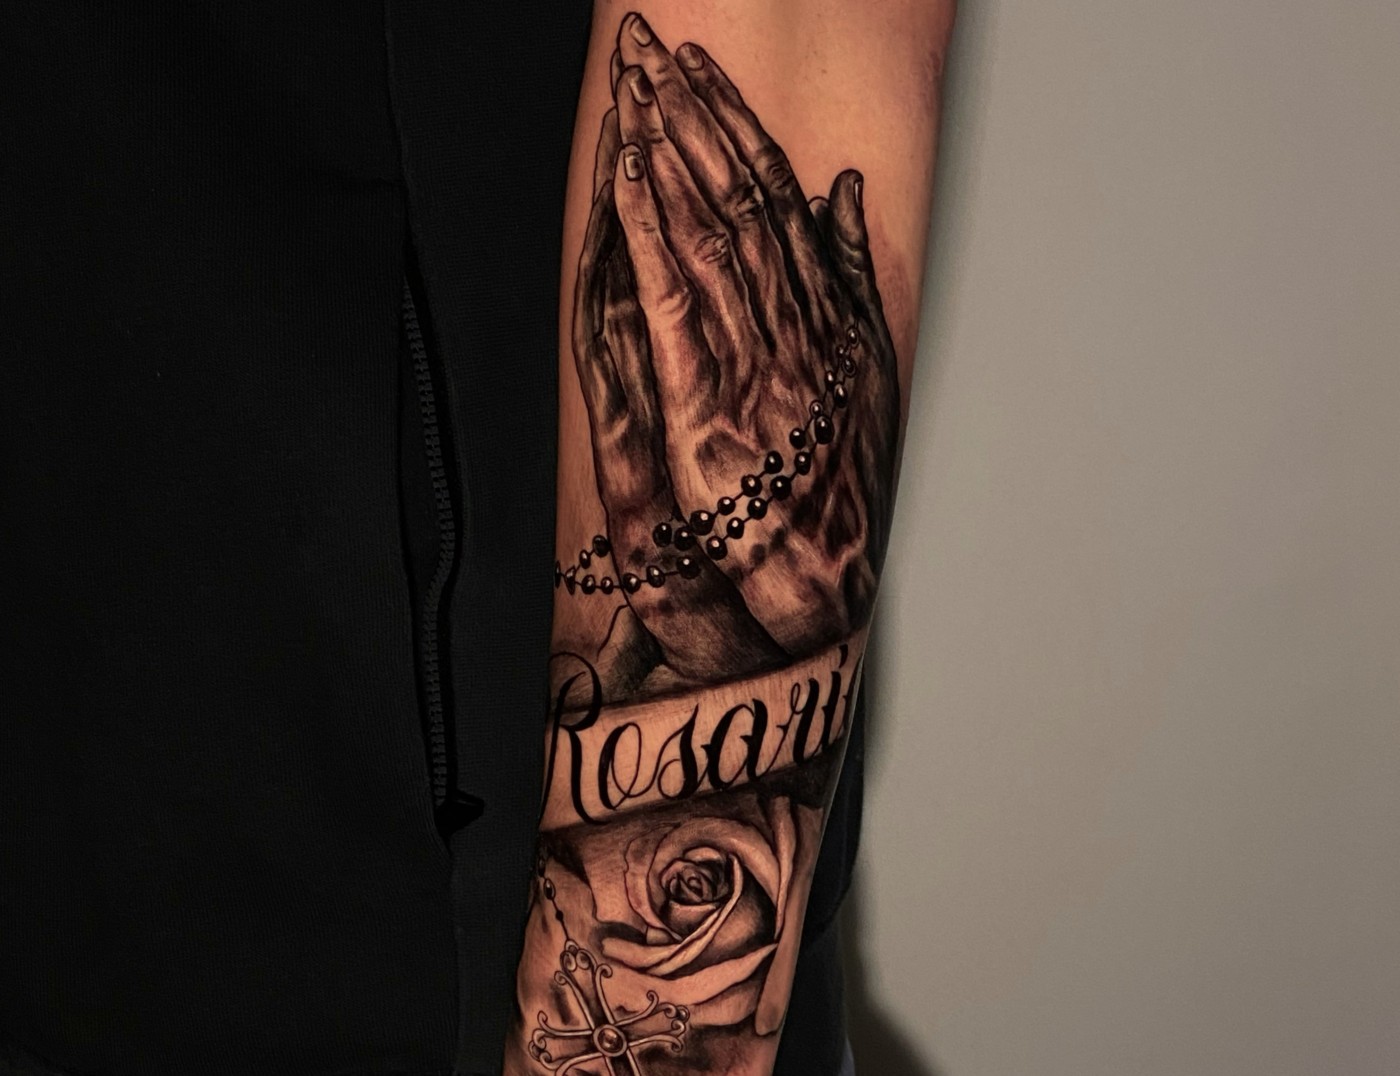 "Rosario" Script Lettering Tattoo With Photo Realism Praying Hands By Rene Cristobal at Iron Palm Tattoos in downtown Atlanta, Georgia. Rene is a resident artist at Iron Palm and comes to us from Vision Tattoo Studio in Concepcion, Chile. Call 404-973-7828 or stop by for a free consultation. Walk ins are welcome.